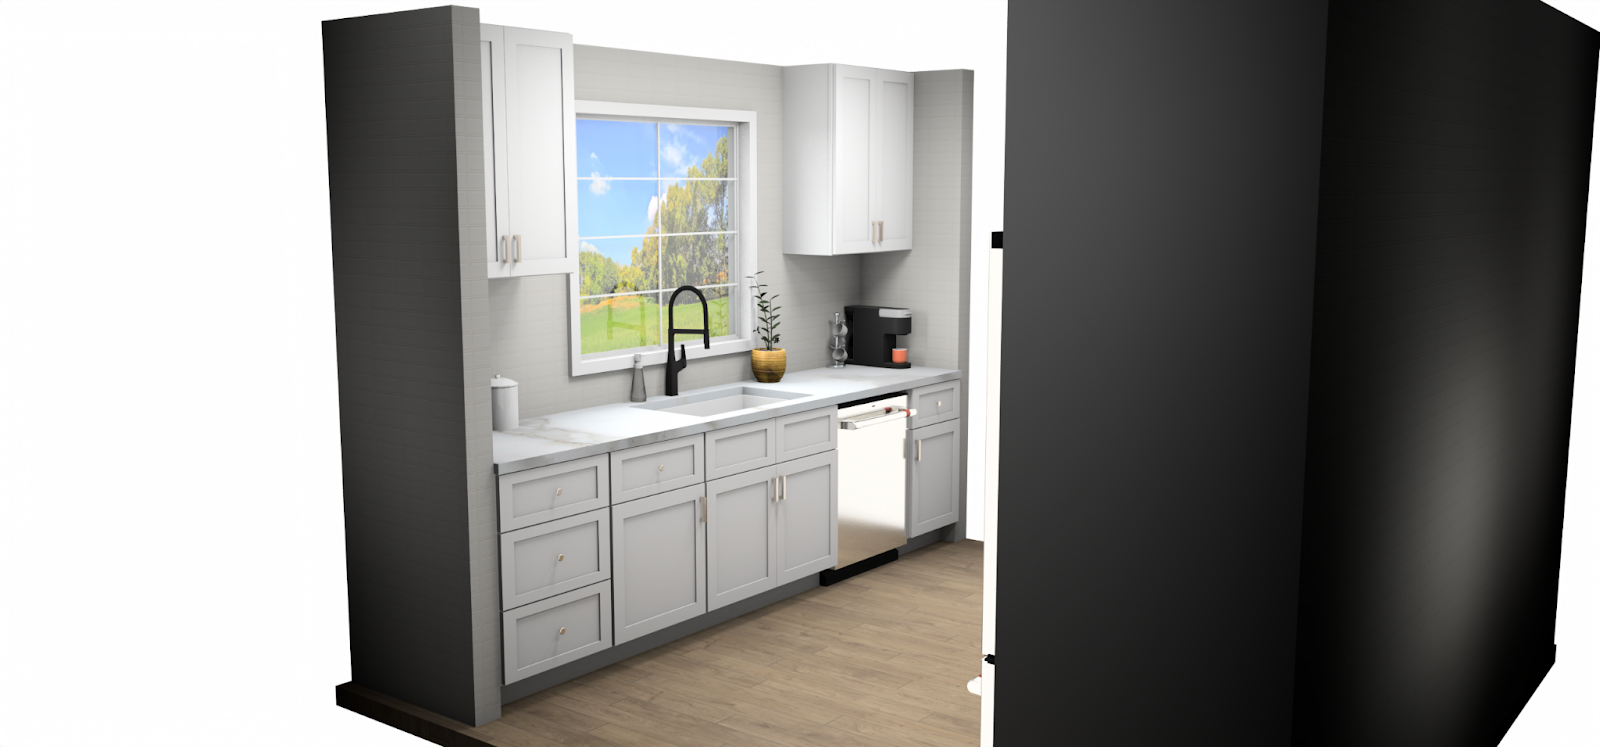 Painted Cabinets Cost